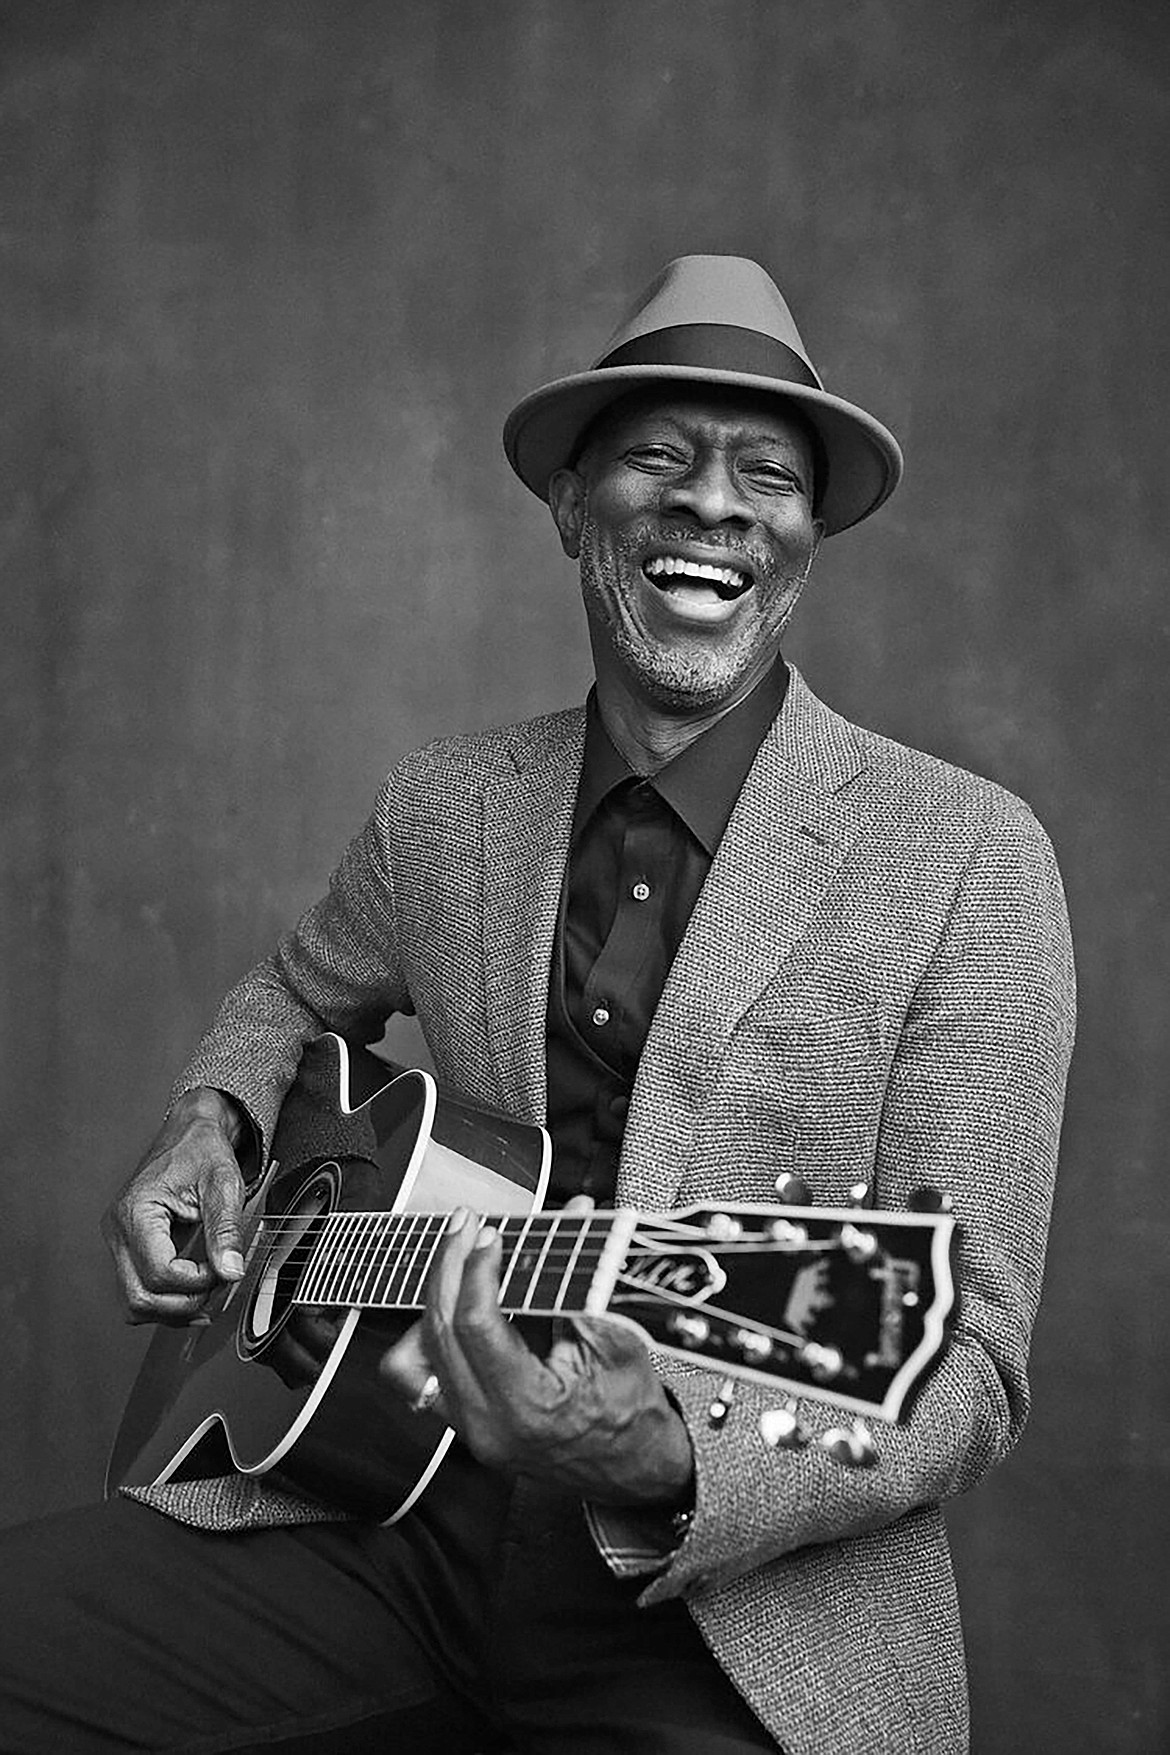 Keb' Mo' is performing Sunday at the Festival at Sandpoint.